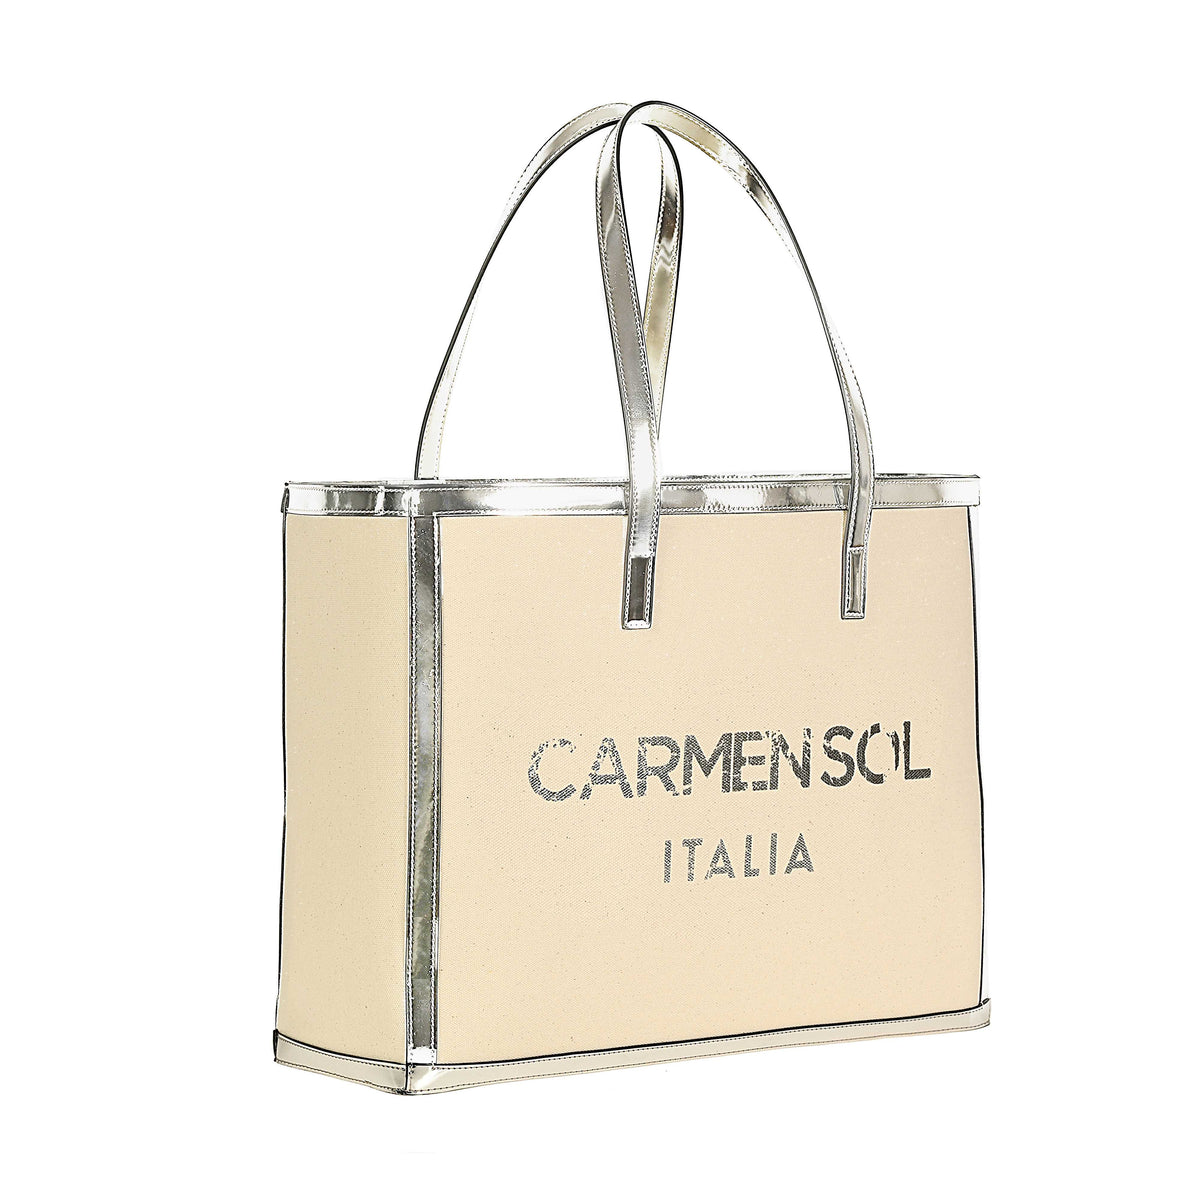 Silver Roma large womens tote bags pefect for shopping day